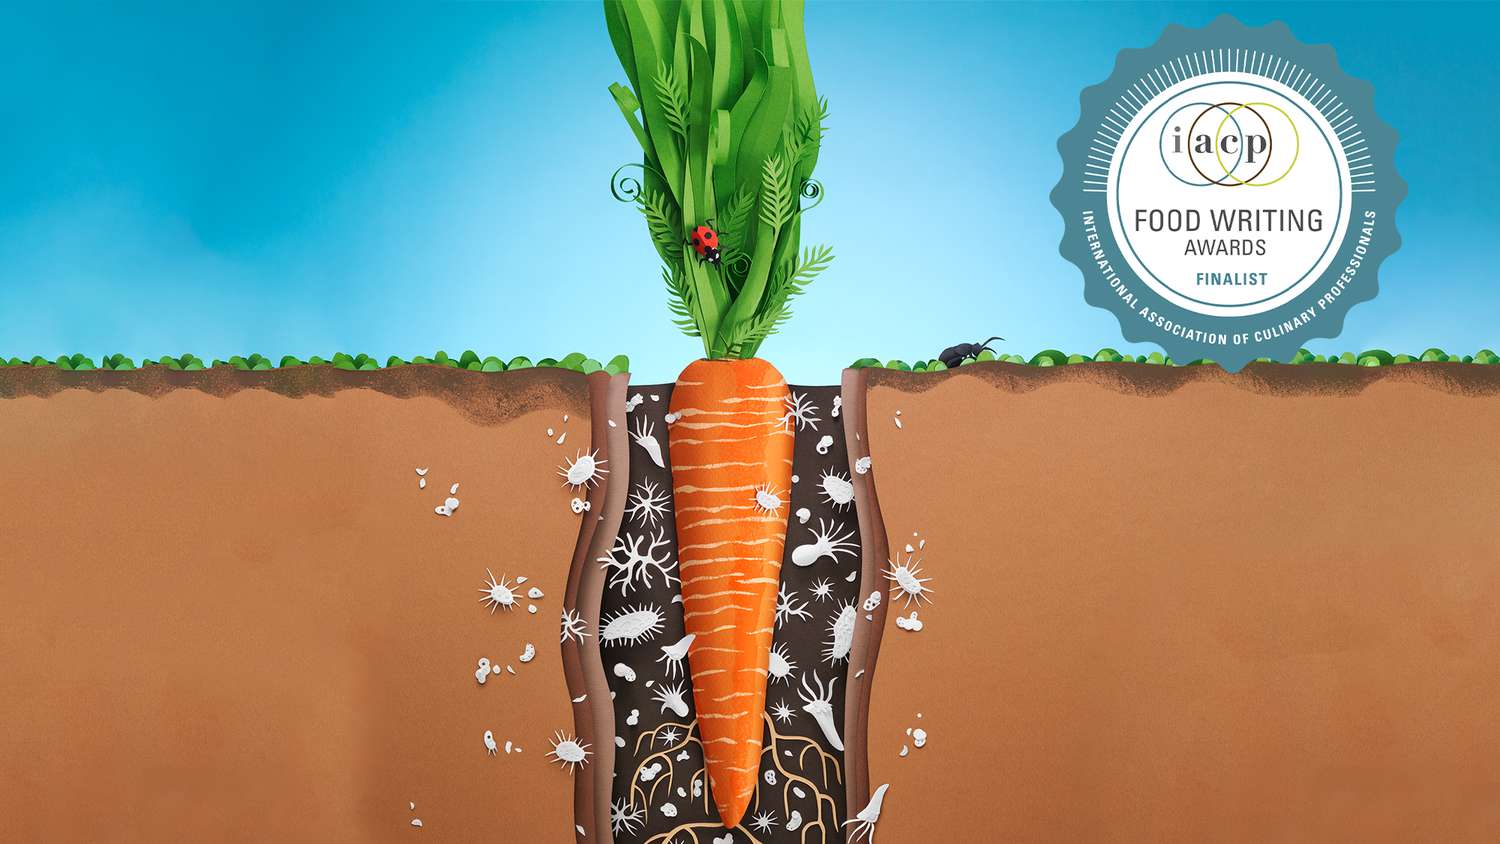 An illustration of a carrot in in the ground showing the roots and bugs living around it